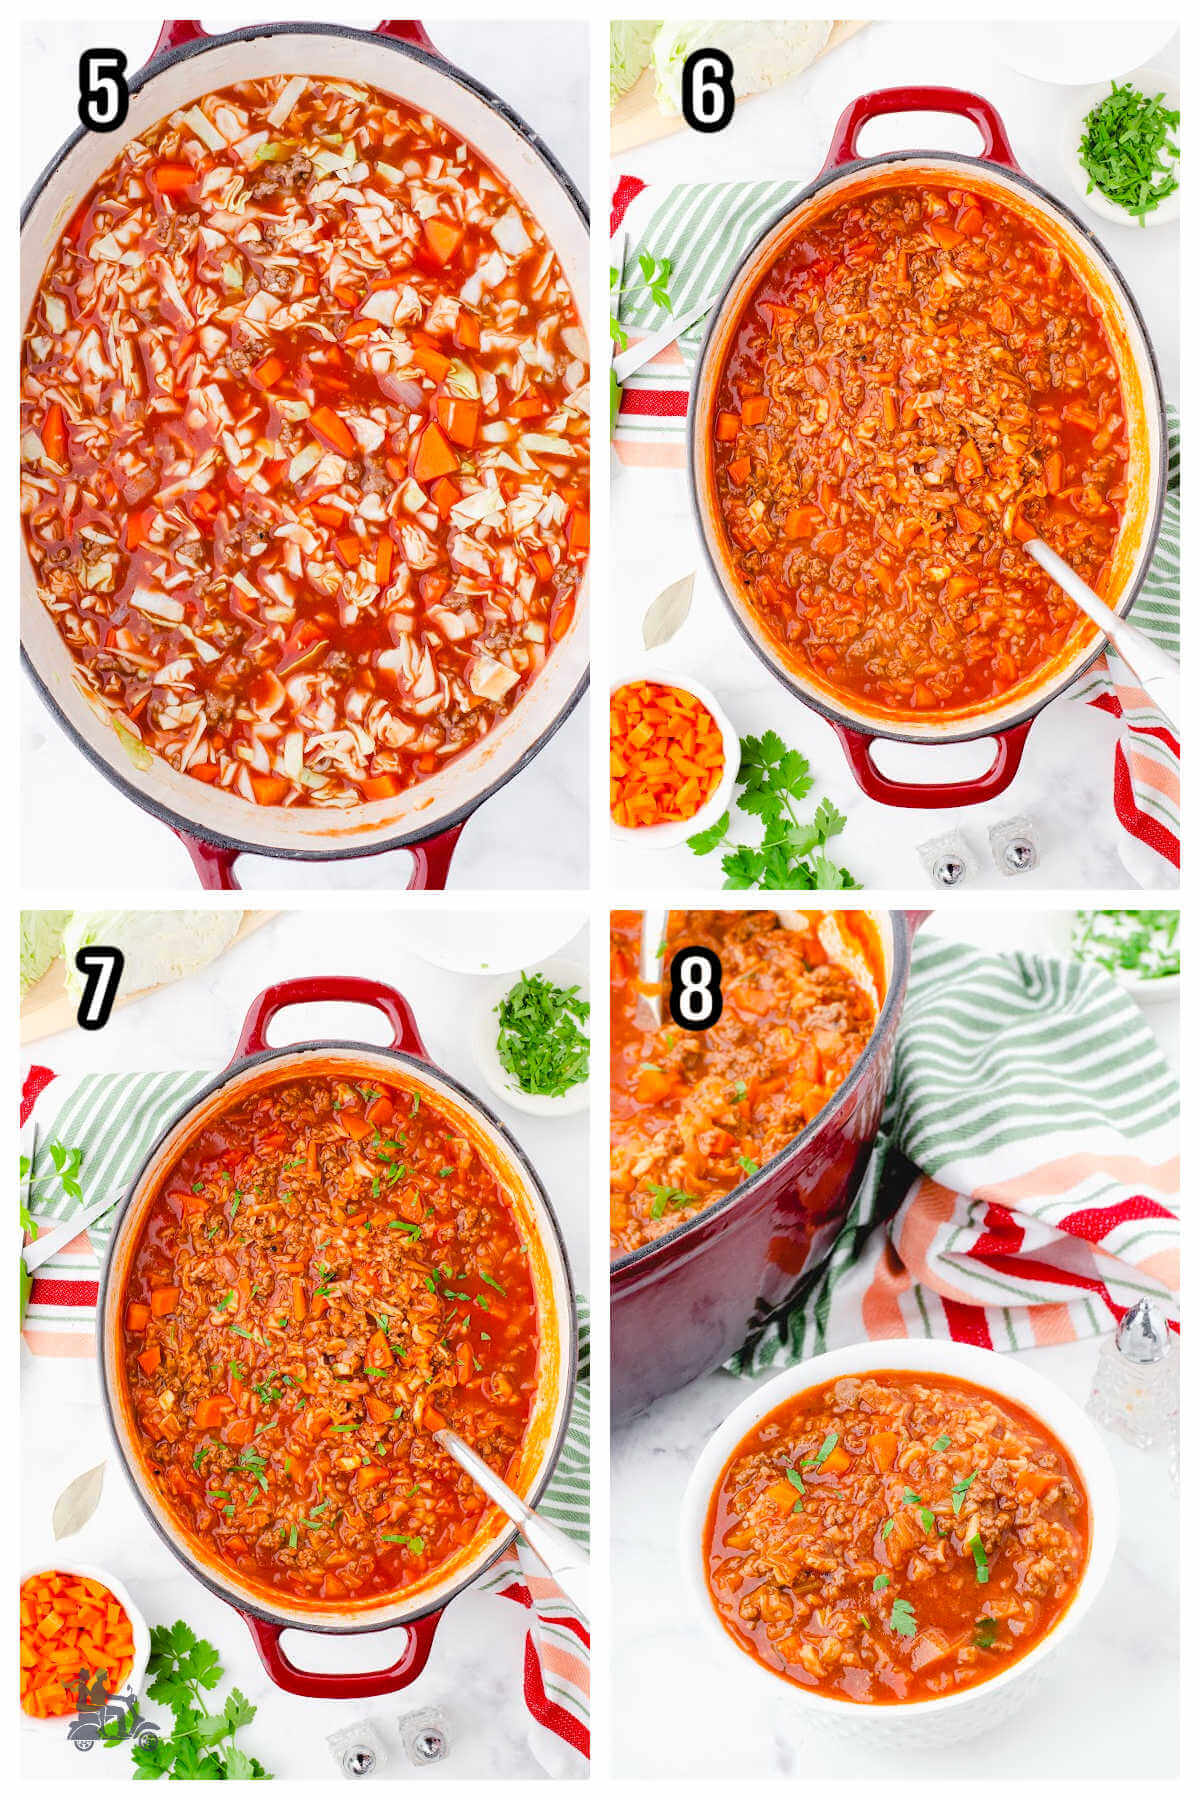 Second set of four steps to making and serving the unstuffed cabbage roll soup recipe. 